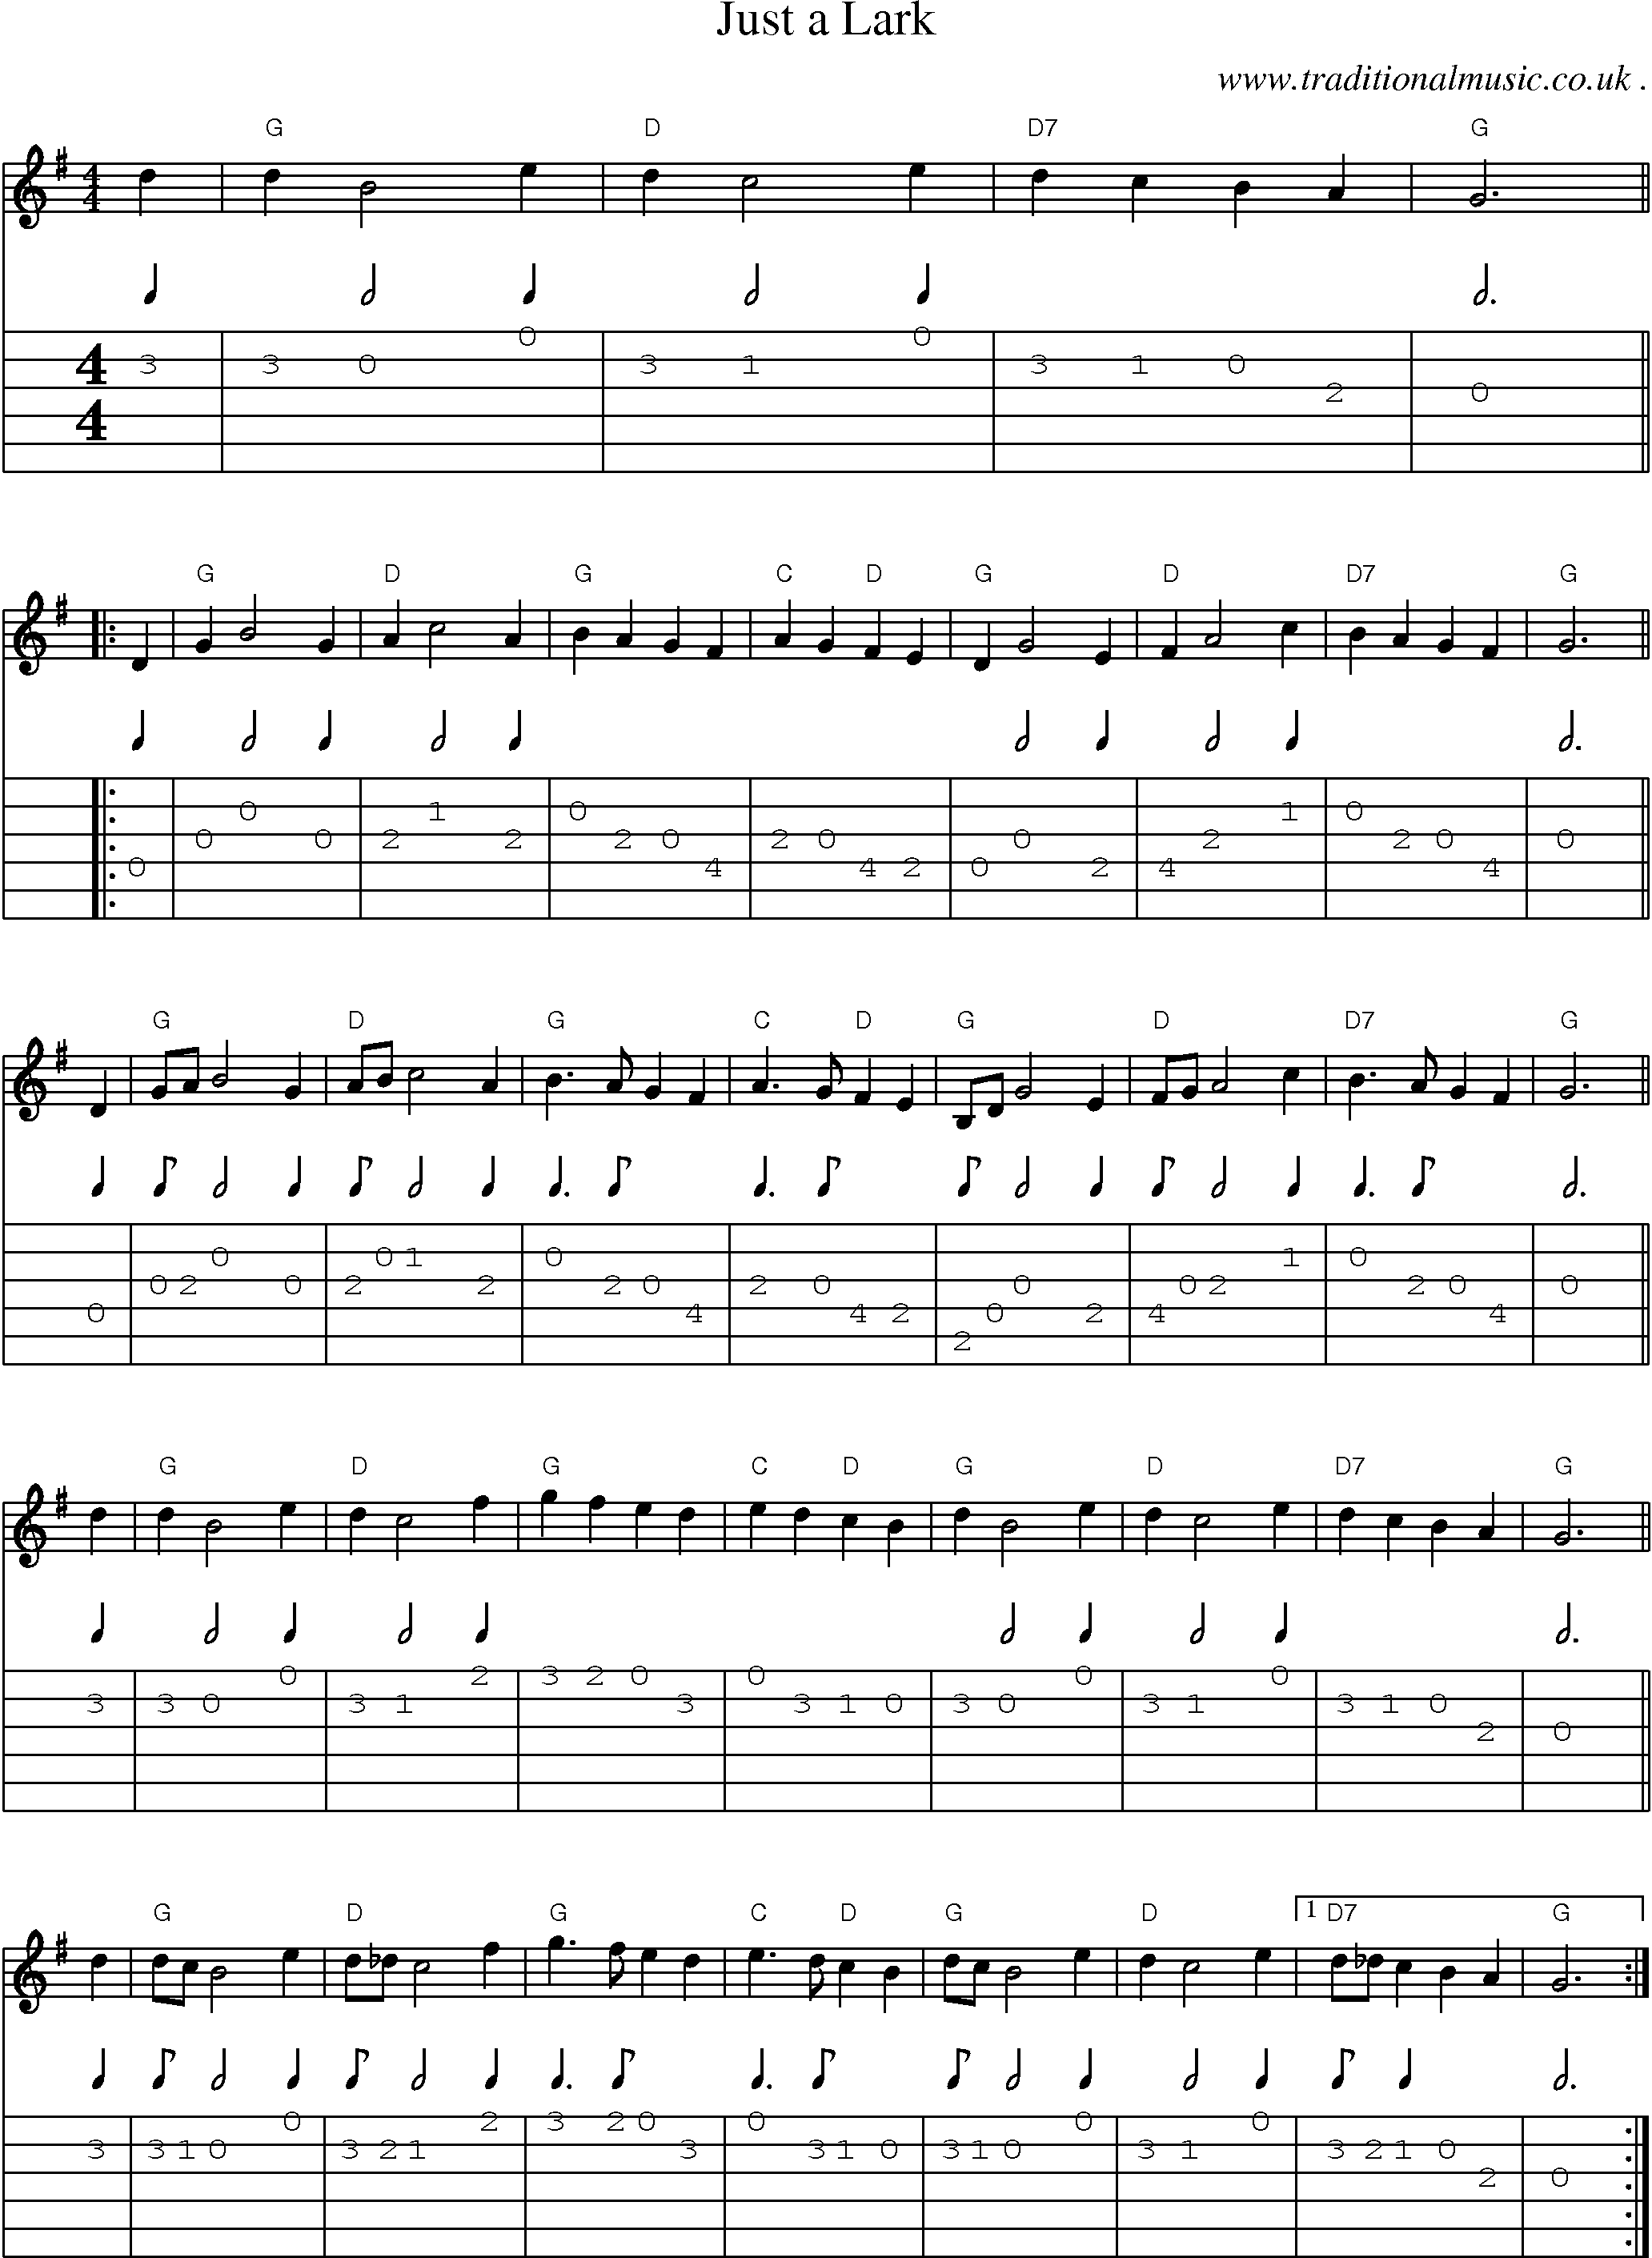 Sheet-music  score, Chords and Guitar Tabs for Just A Lark